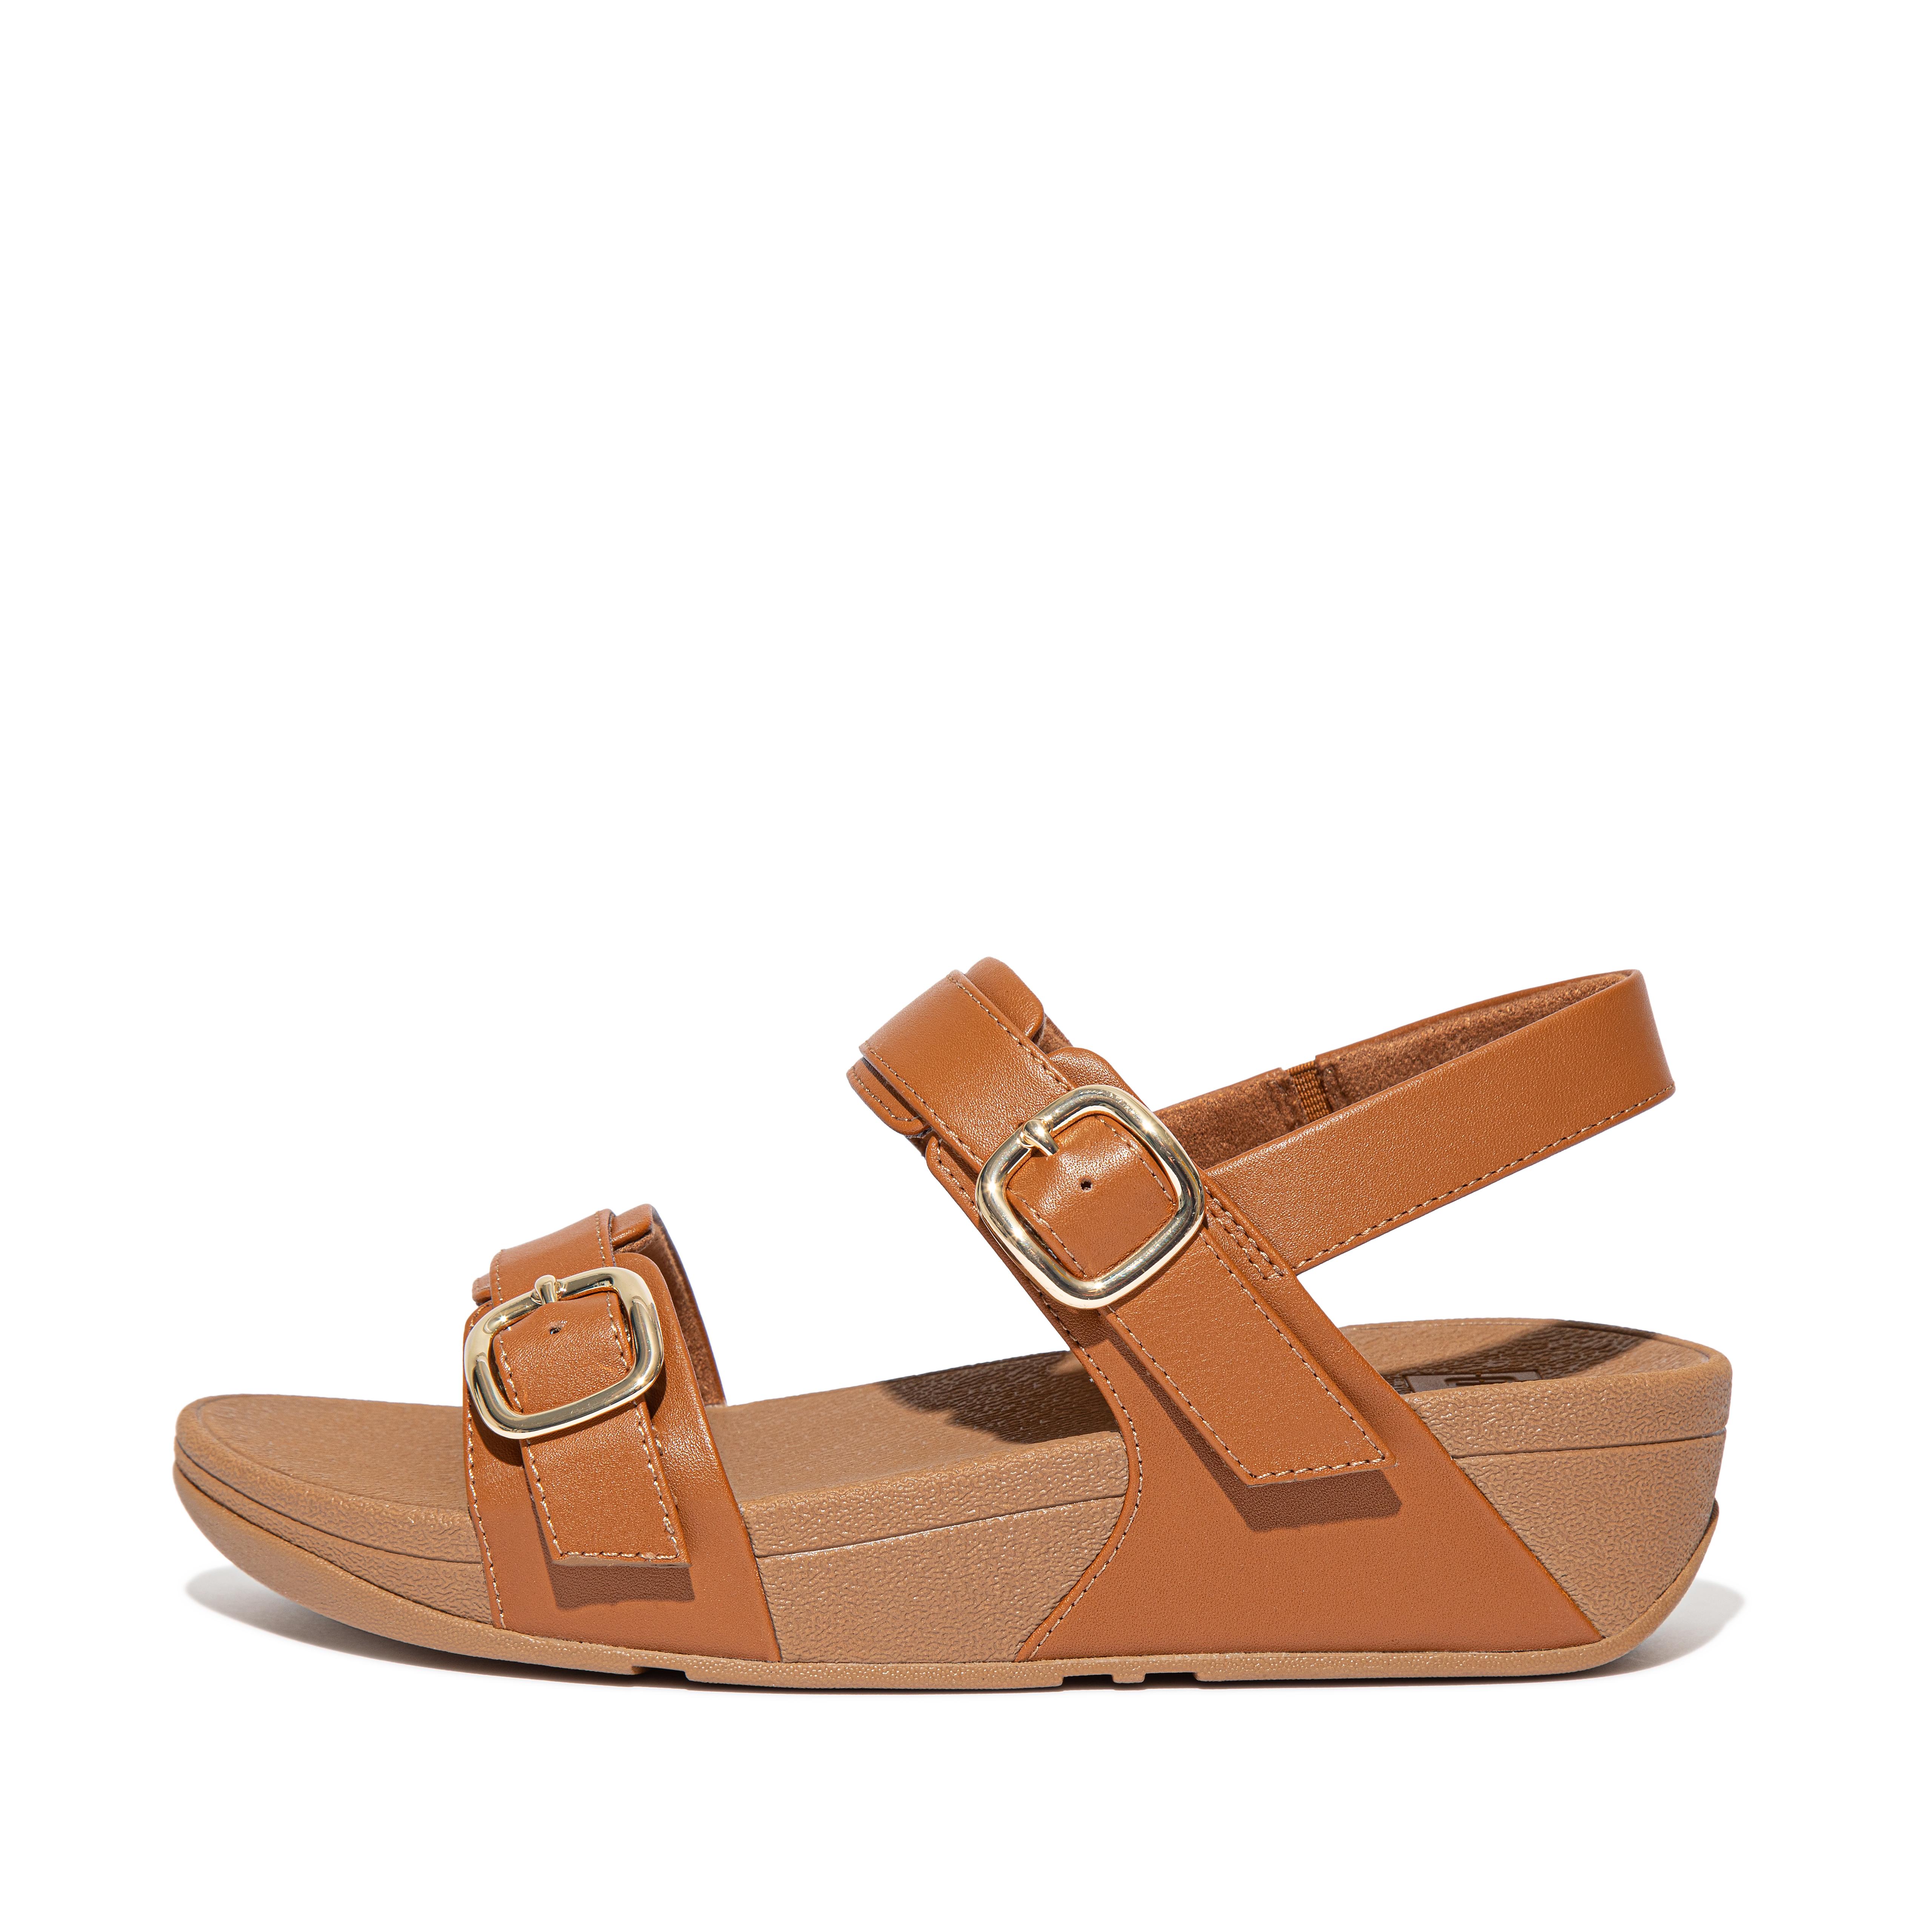 Fitflop Adjustable Leather Sandals,Light Tan